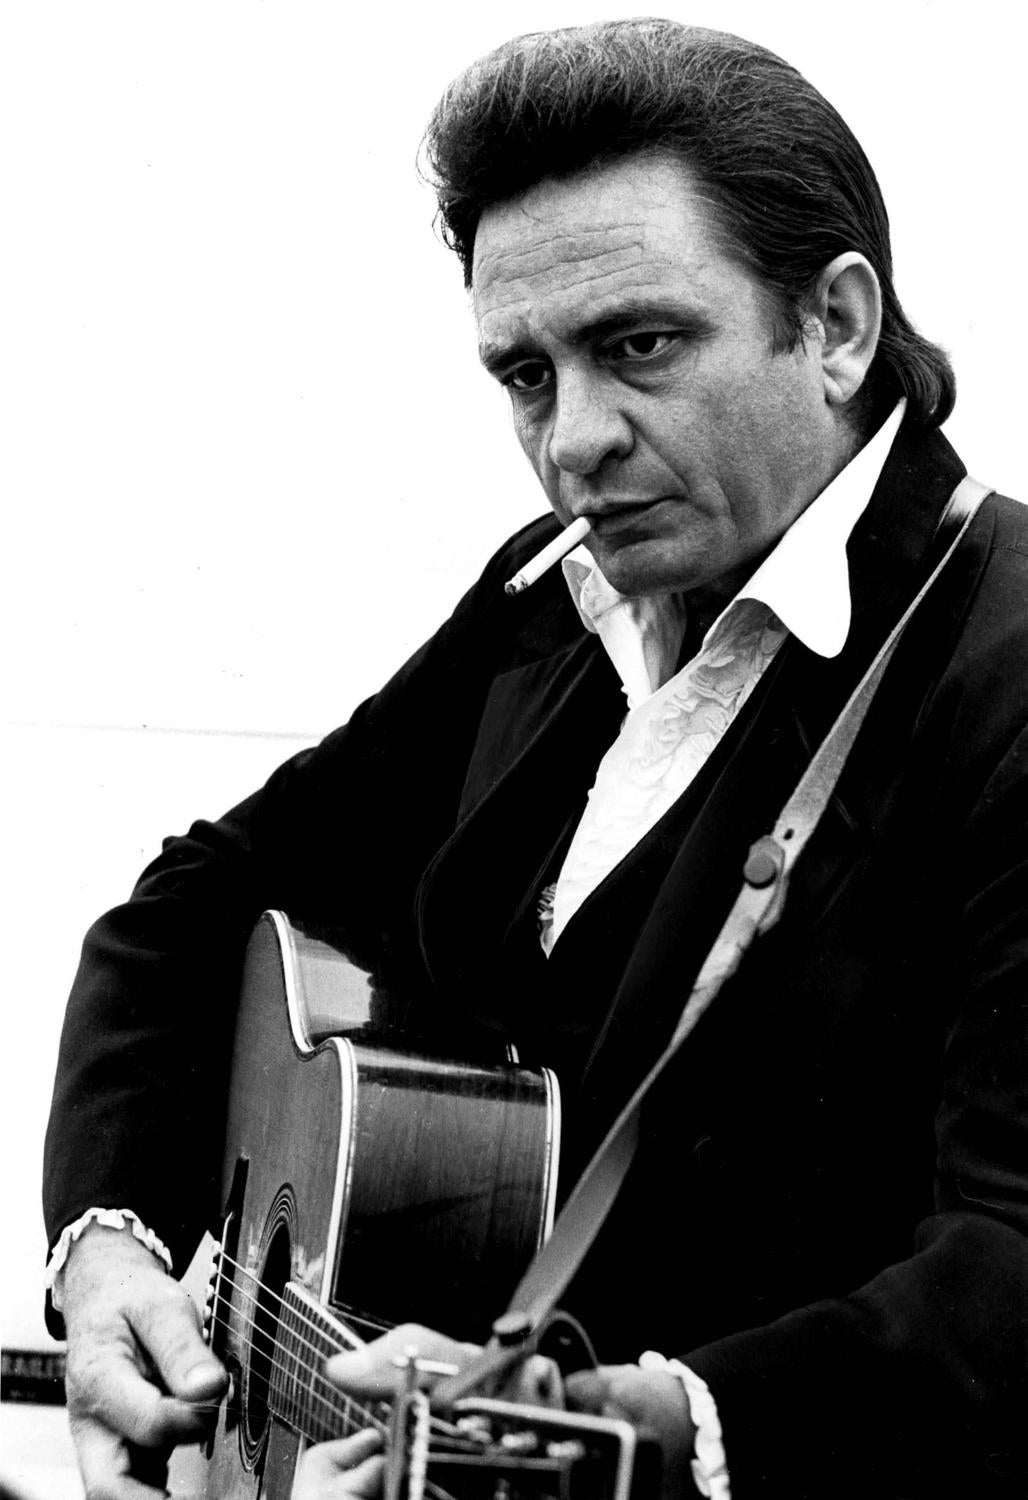 Unknown - Johnny Cash with Guitar and Cigarette at 1stdibs